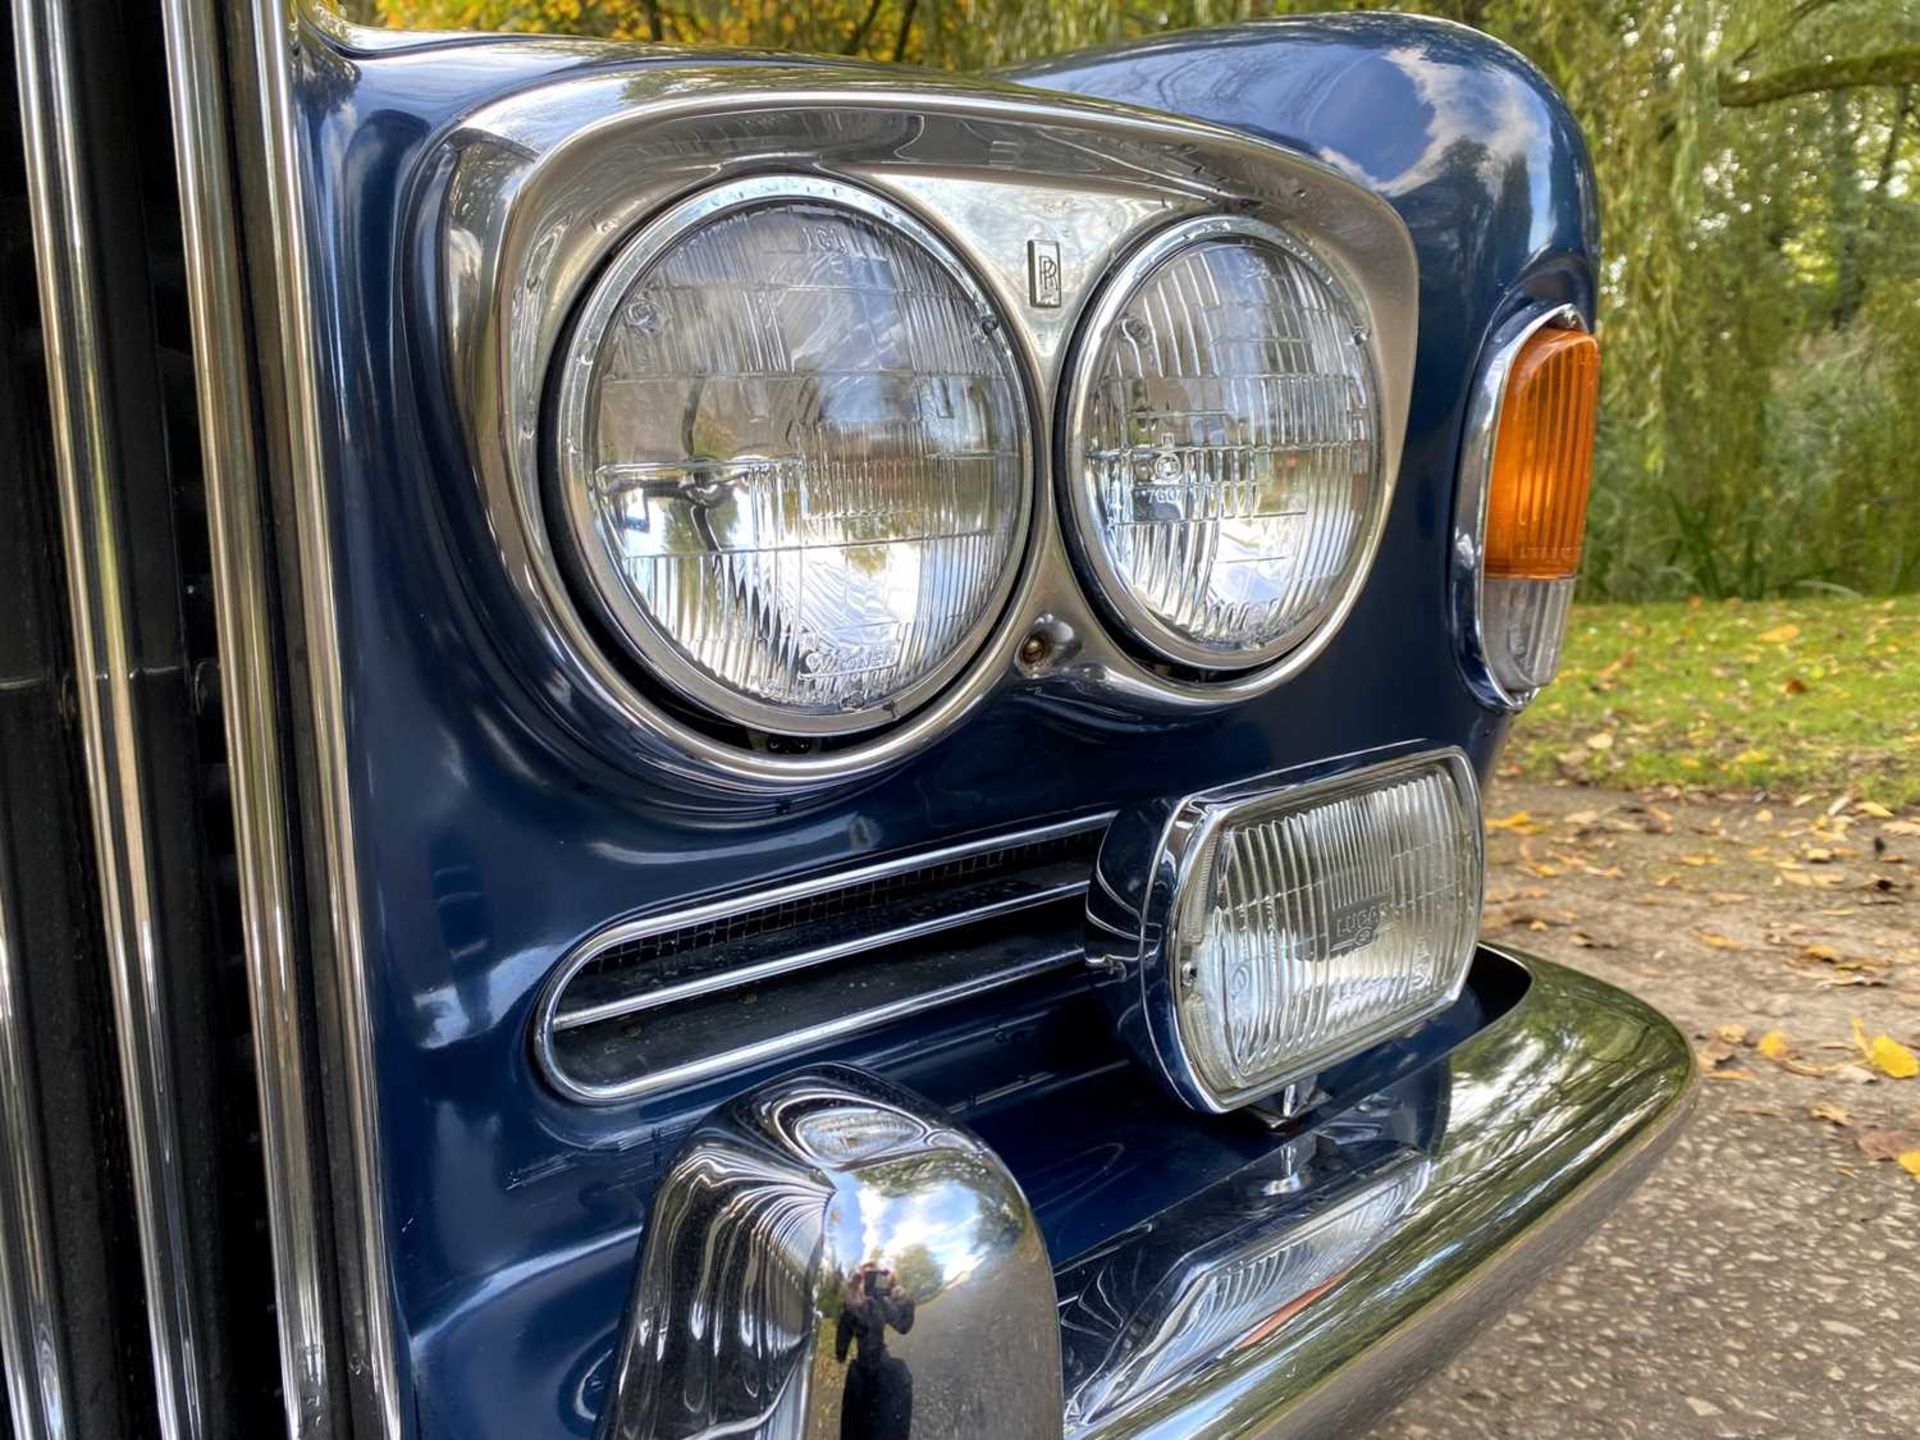 1971 Rolls-Royce Corniche Saloon Finished in Royal Navy Blue with Tobacco hide - Image 80 of 100